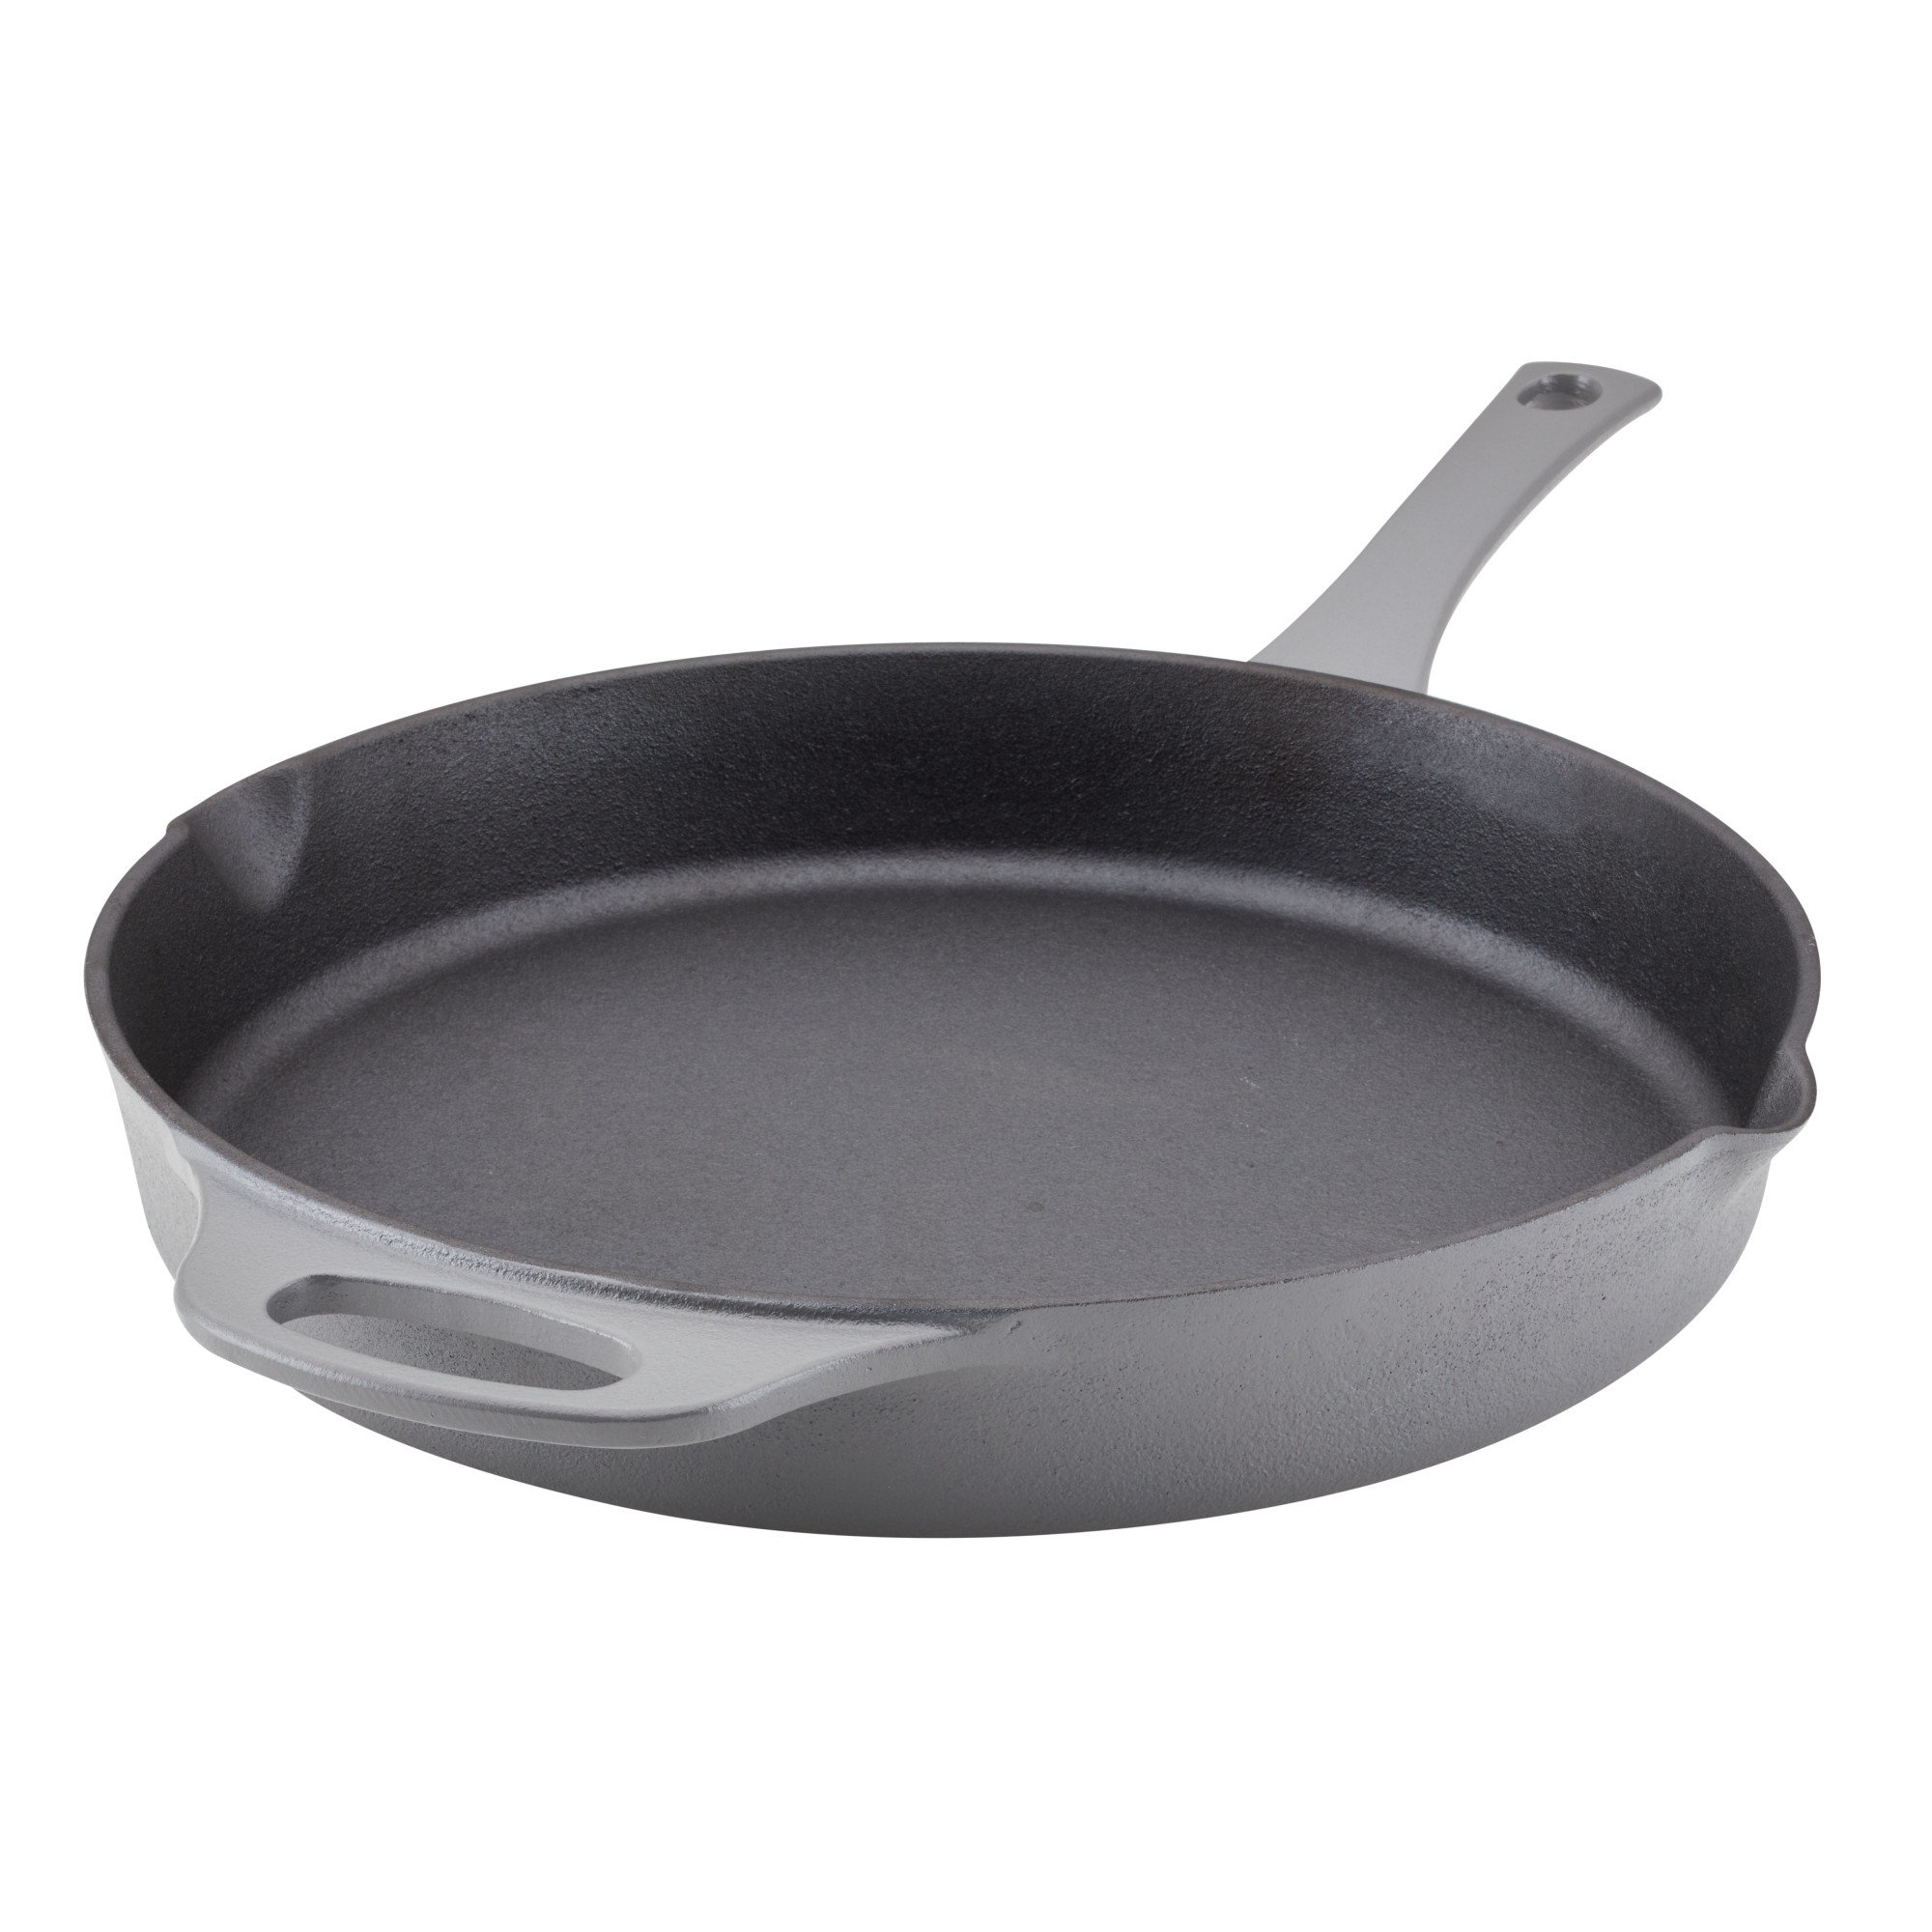 Bruntmor Long Lasting Cast Iron Skillet With Lids, 12-Inch